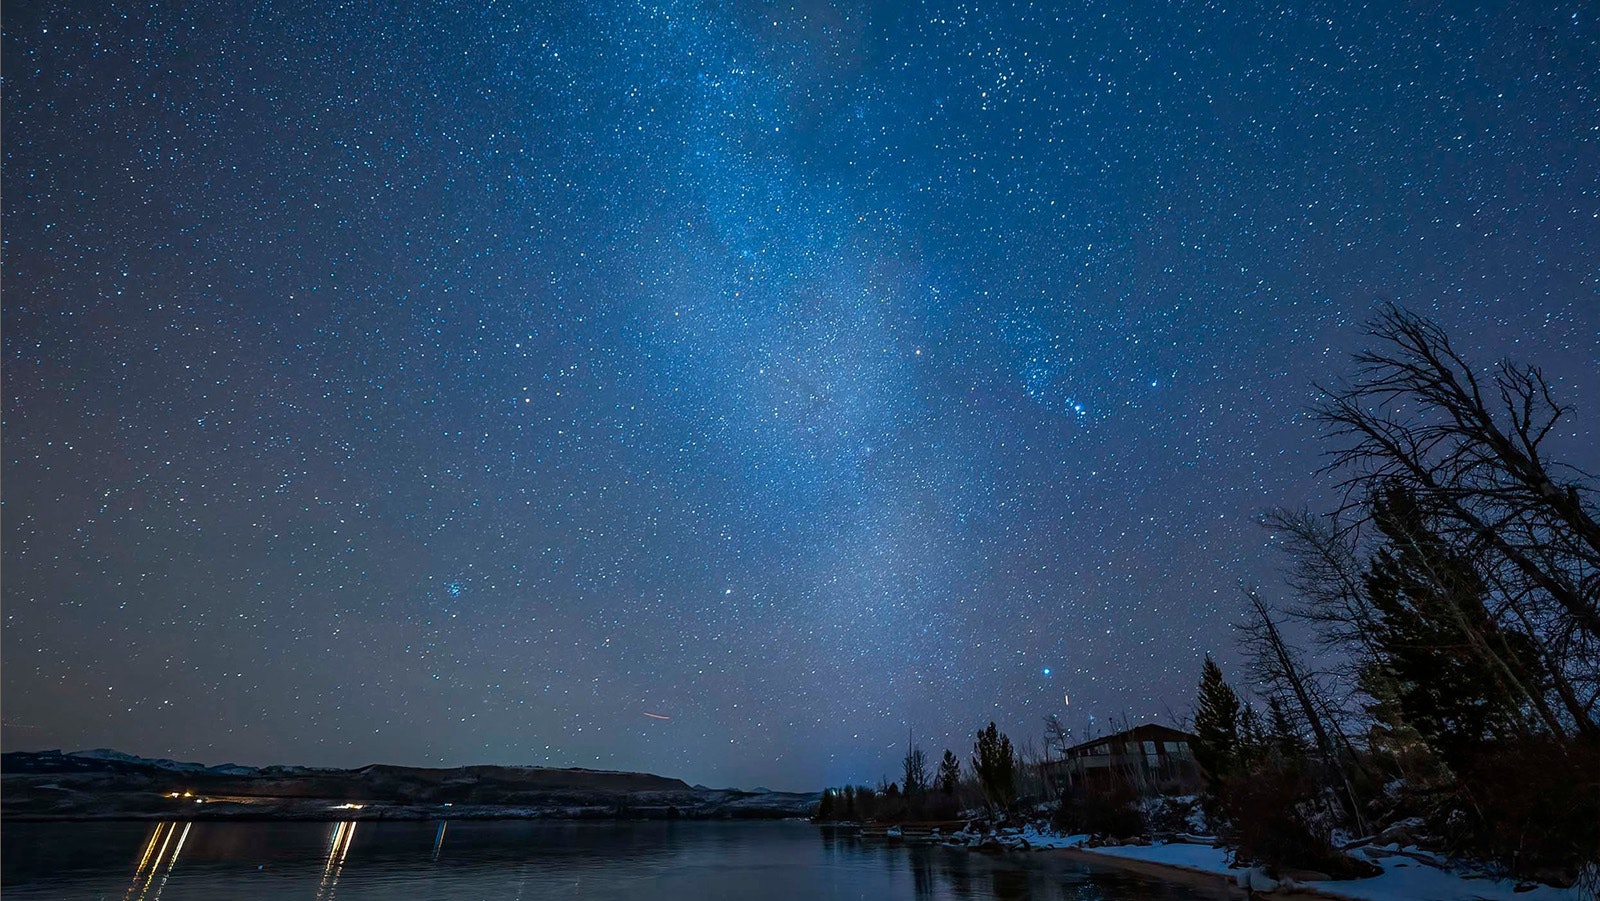 Fremont Lake under a clear night sky.